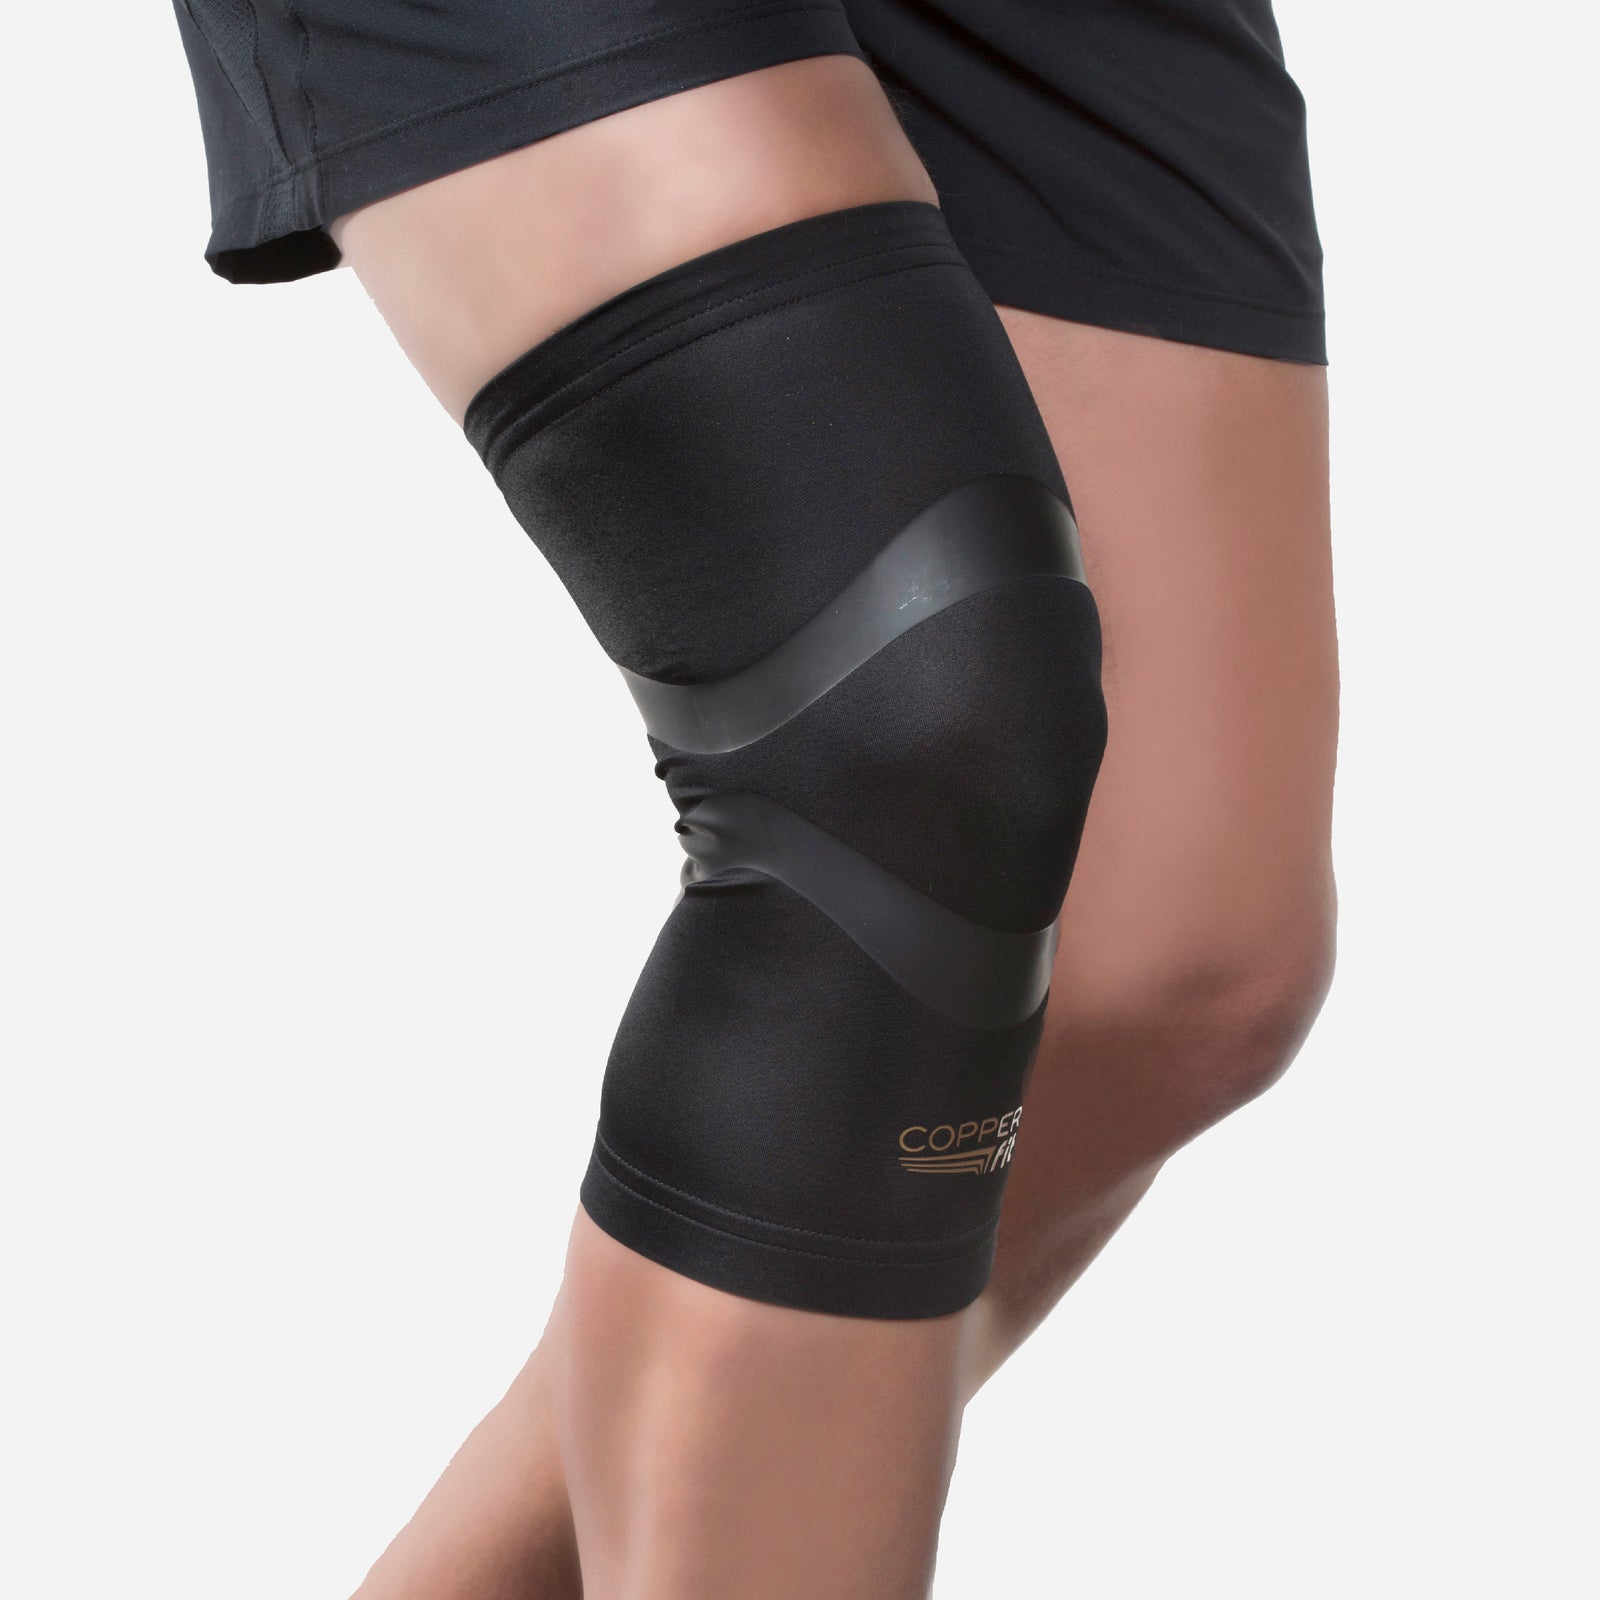 Performance Knee Support - Advanced flexibility, stabilizing support